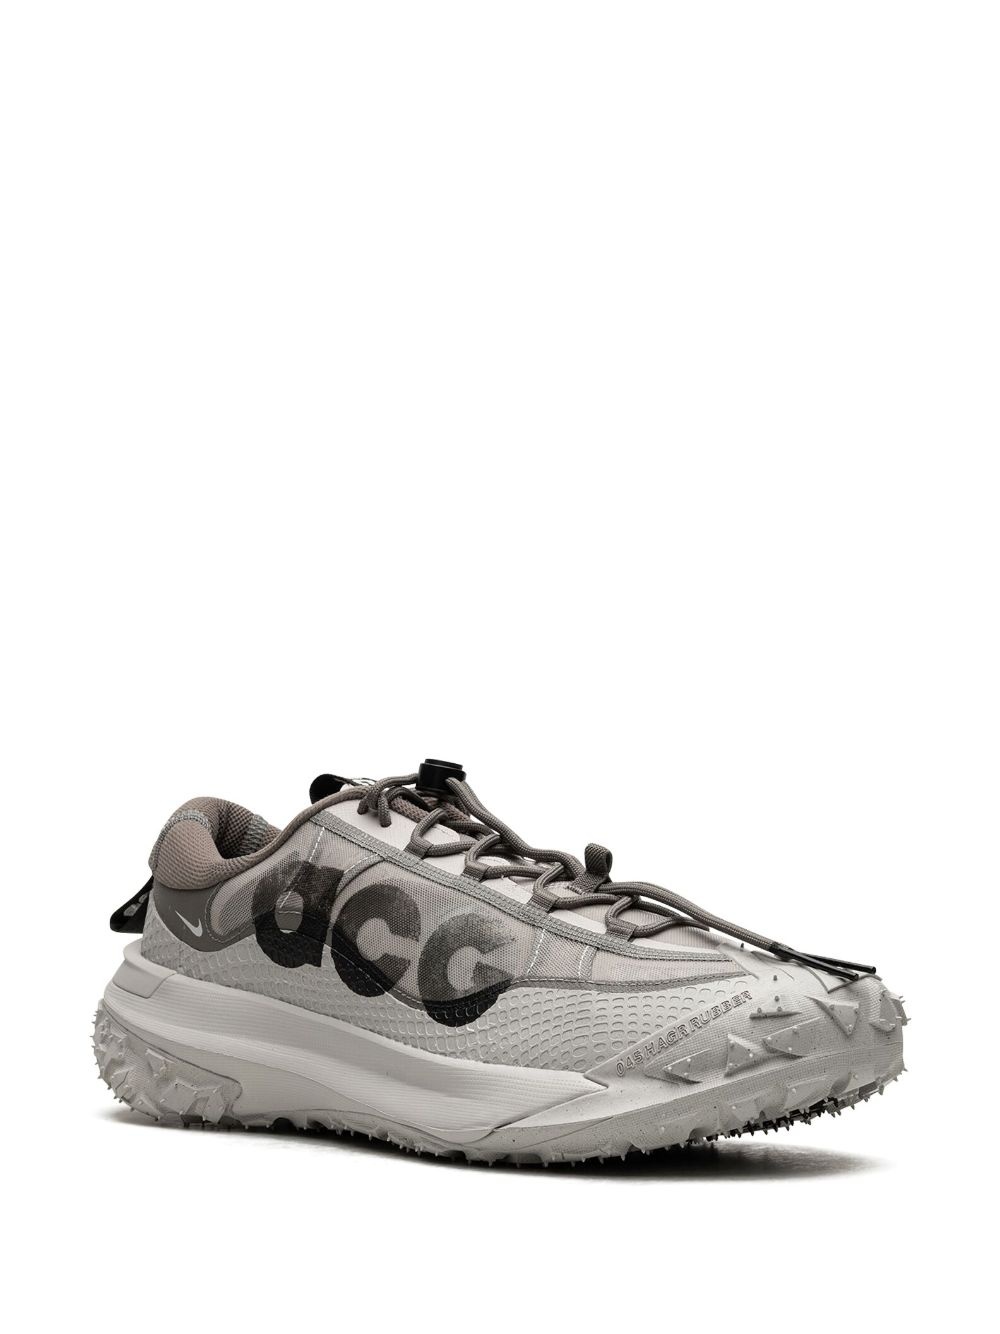 ACG Mountain Fly Low 2 "Iron Ore" sneakers - 2